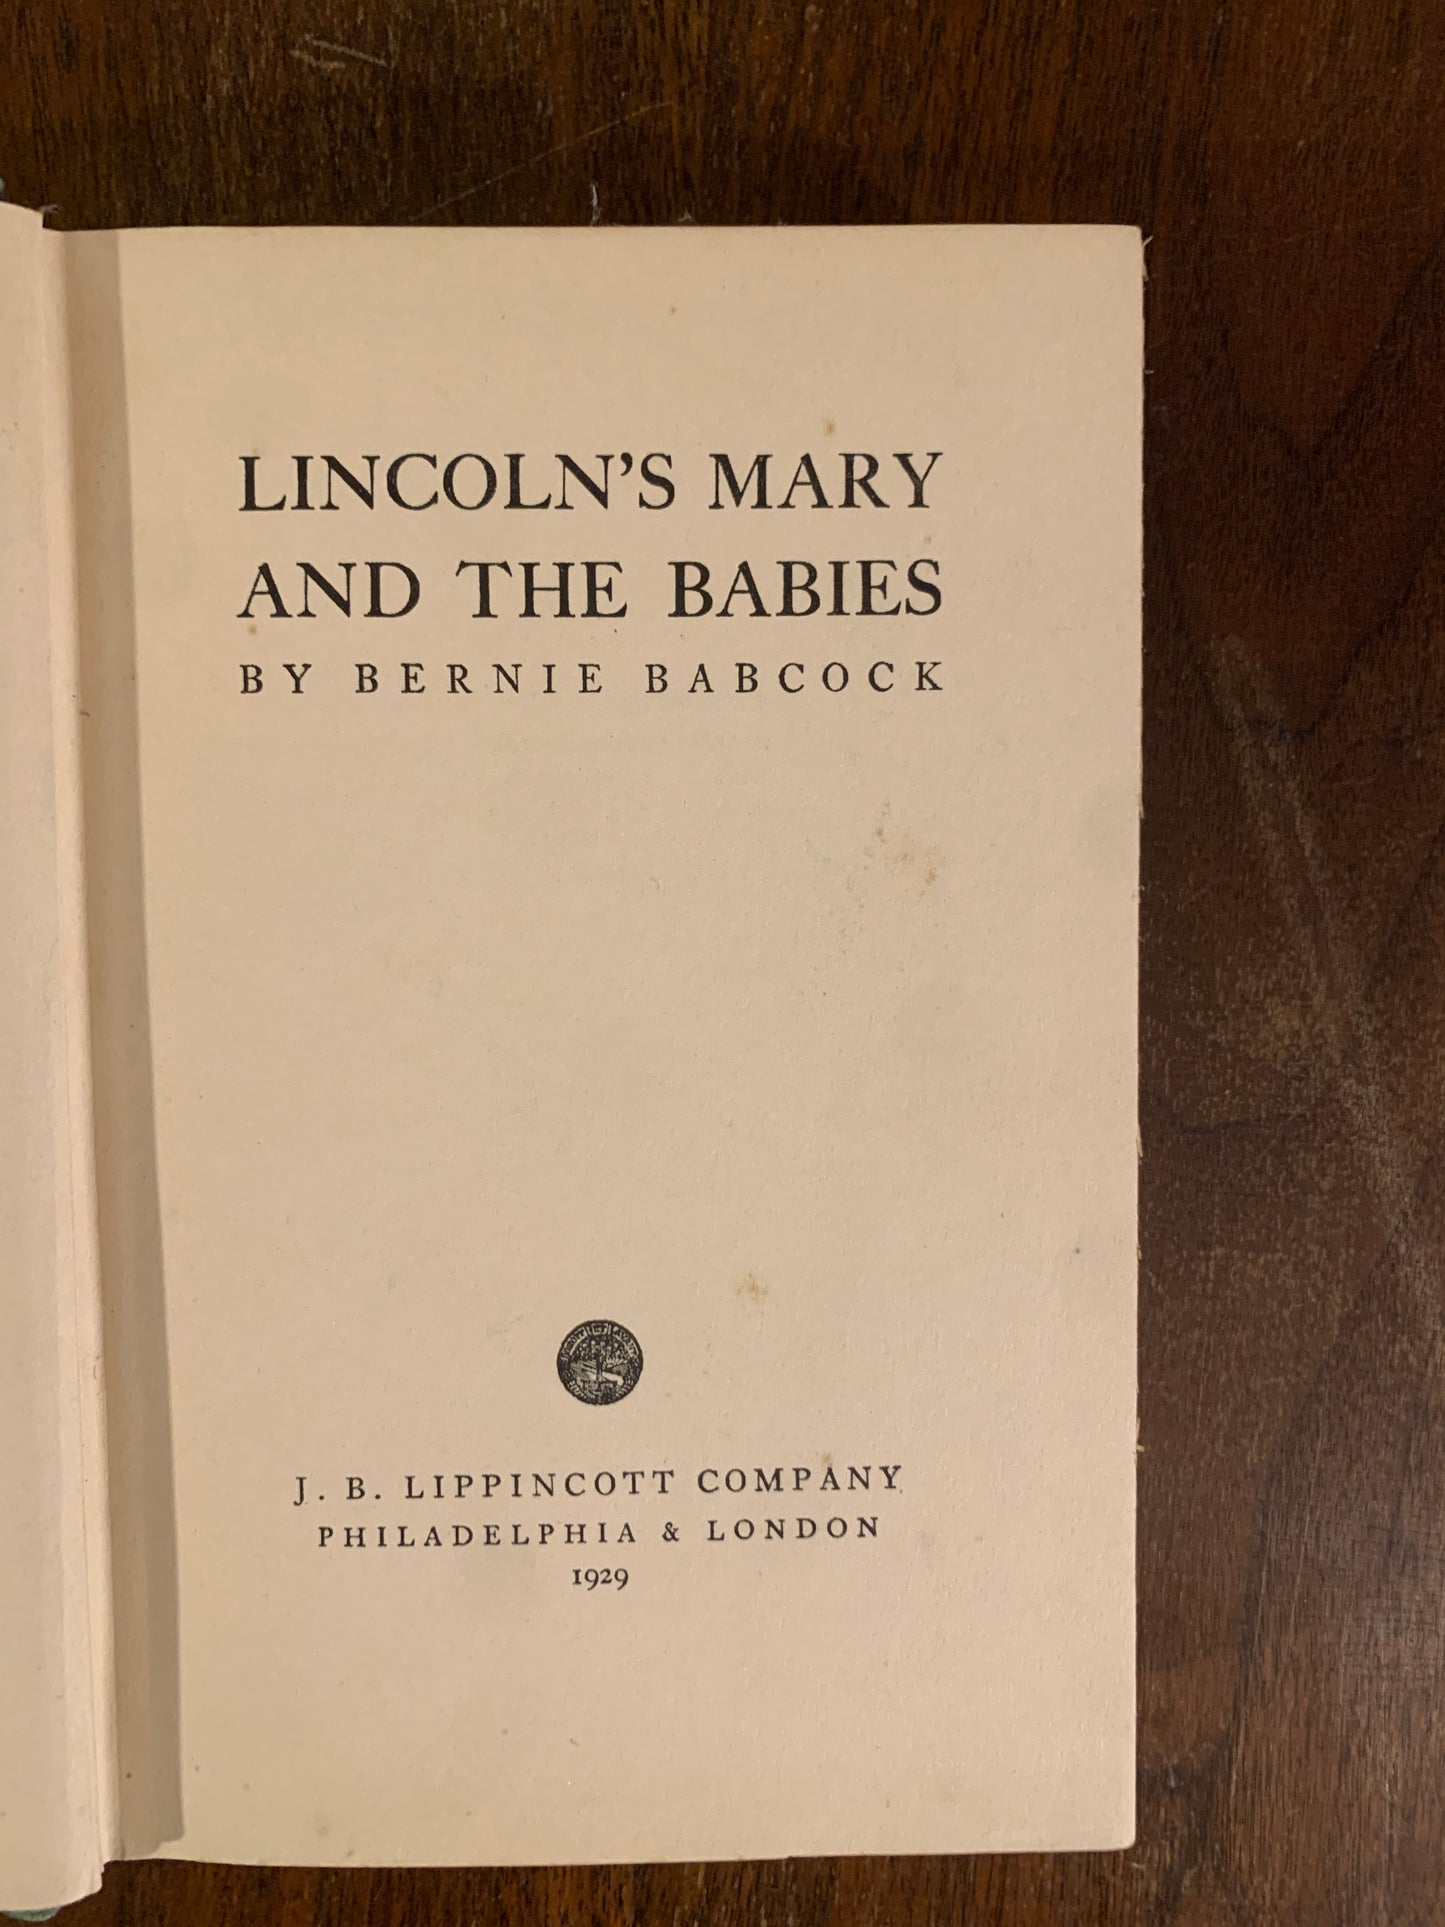 Lincoln's Mary and the Babies by Bernie Babcock 1929